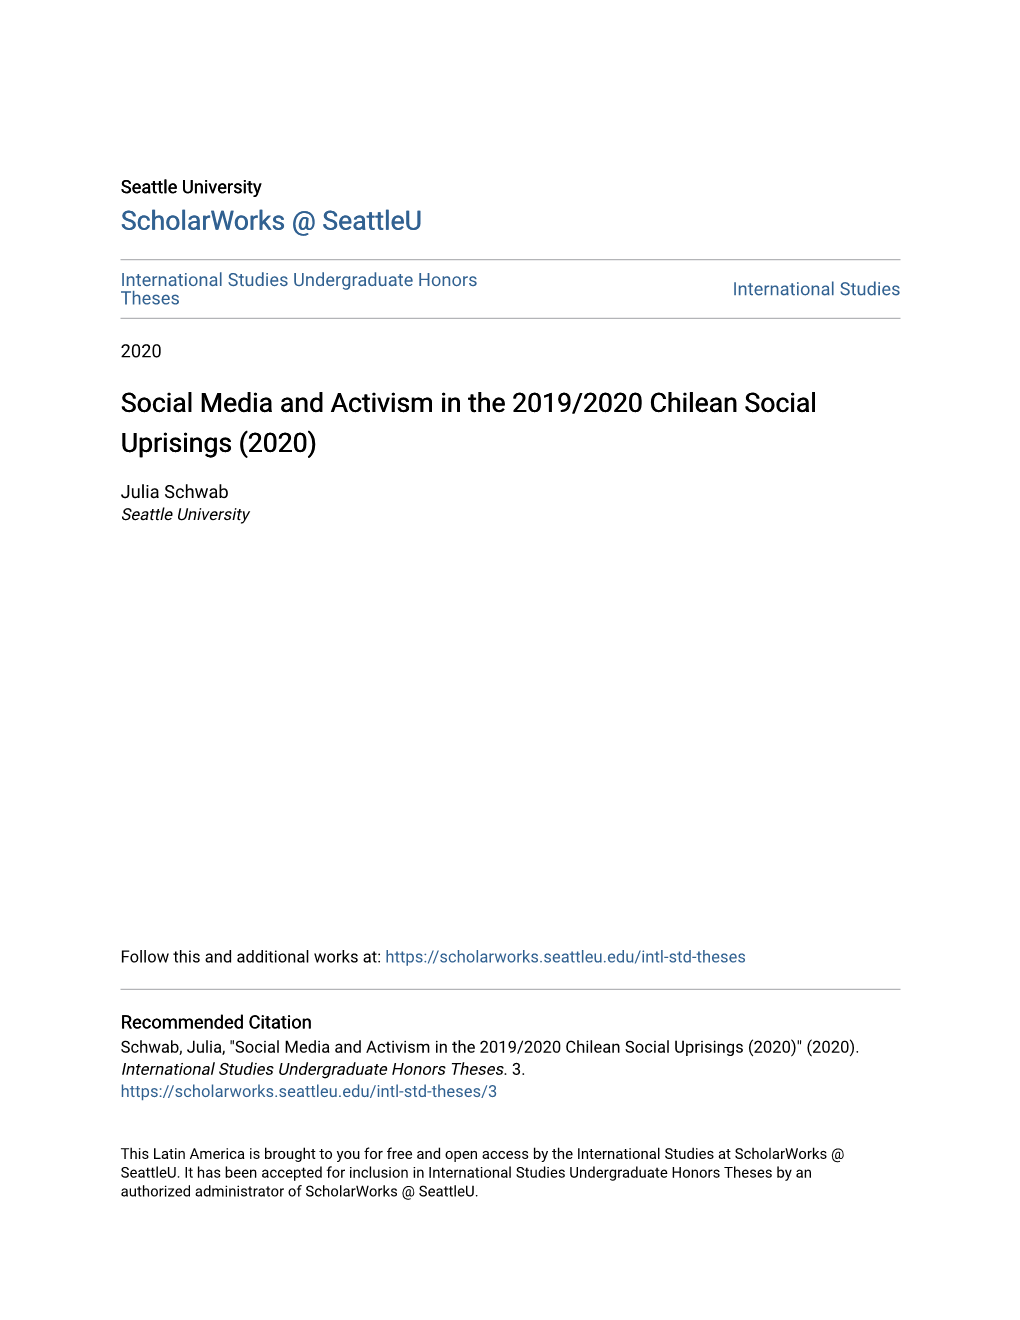 Social Media and Activism in the 2019/2020 Chilean Social Uprisings (2020)